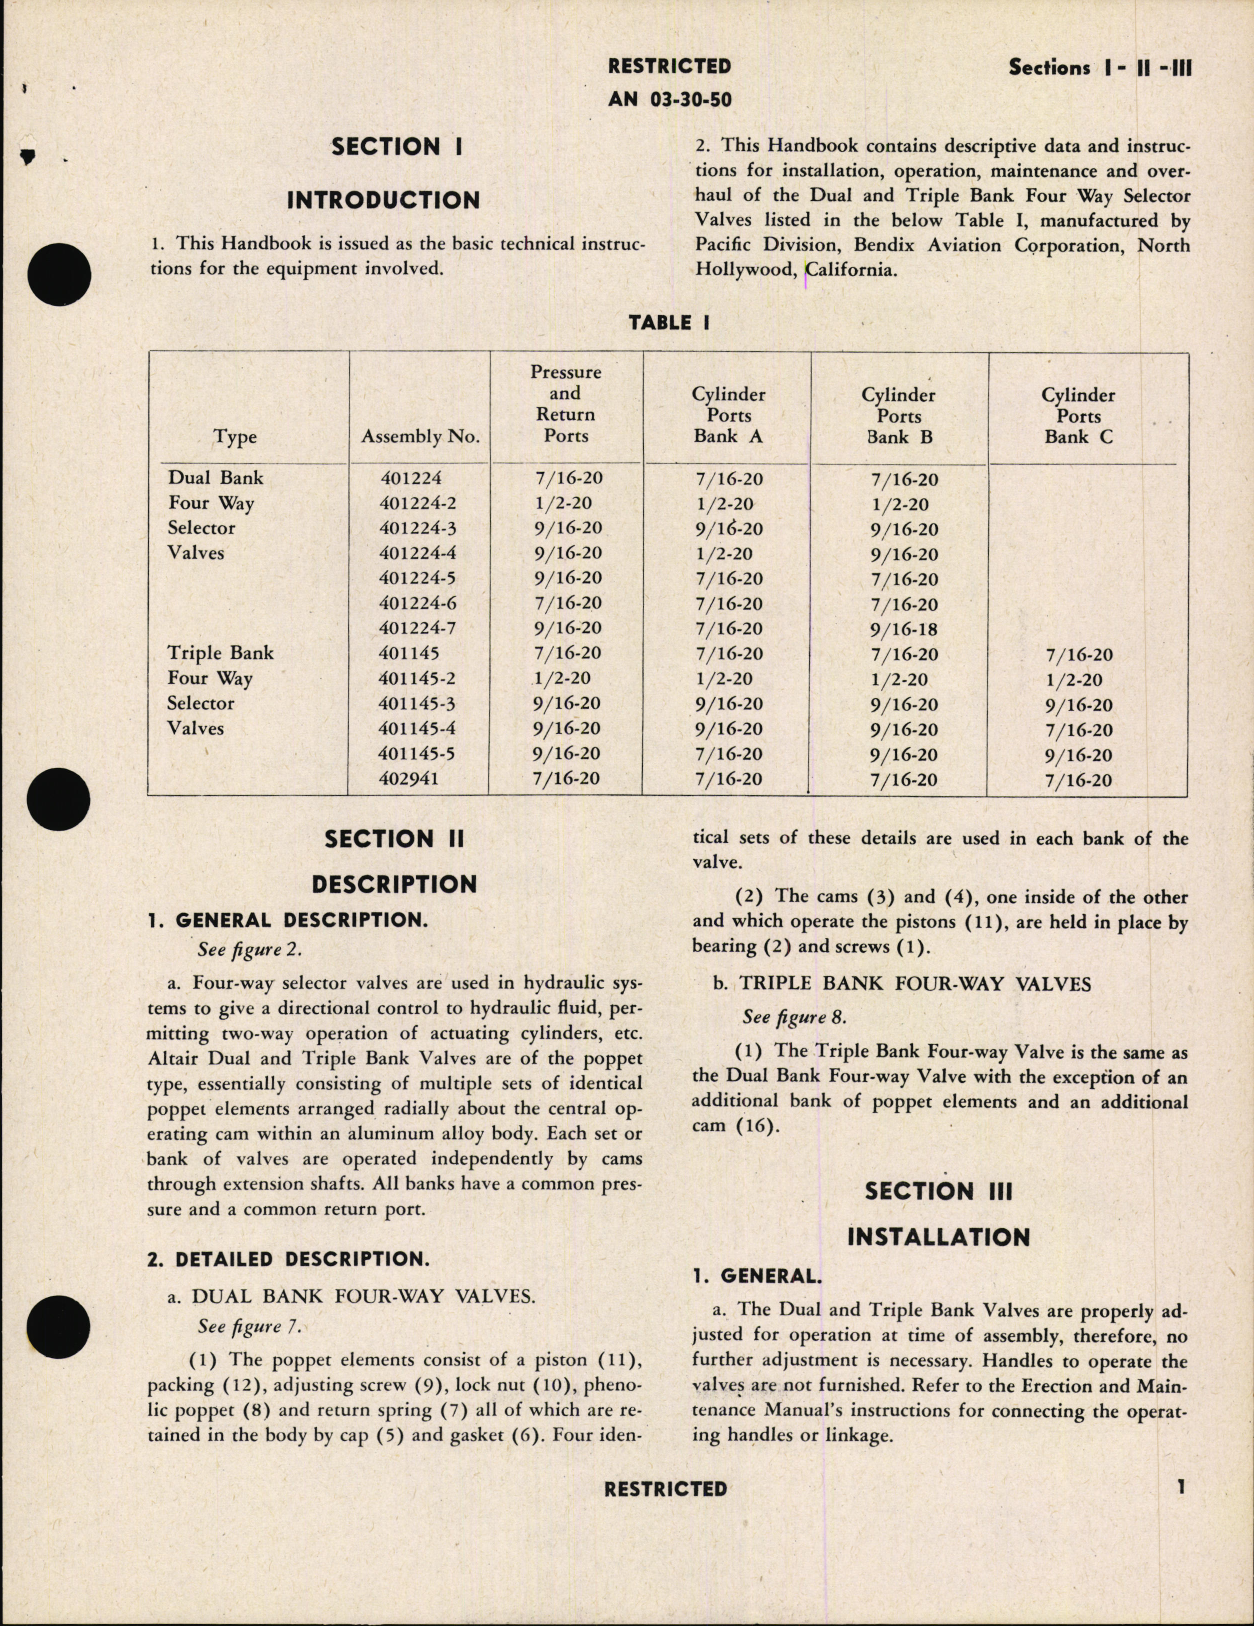 Sample page 5 from AirCorps Library document: Handbook of Instructions With Parts Catalog for Multiples Bank Four-Way Selector Valves